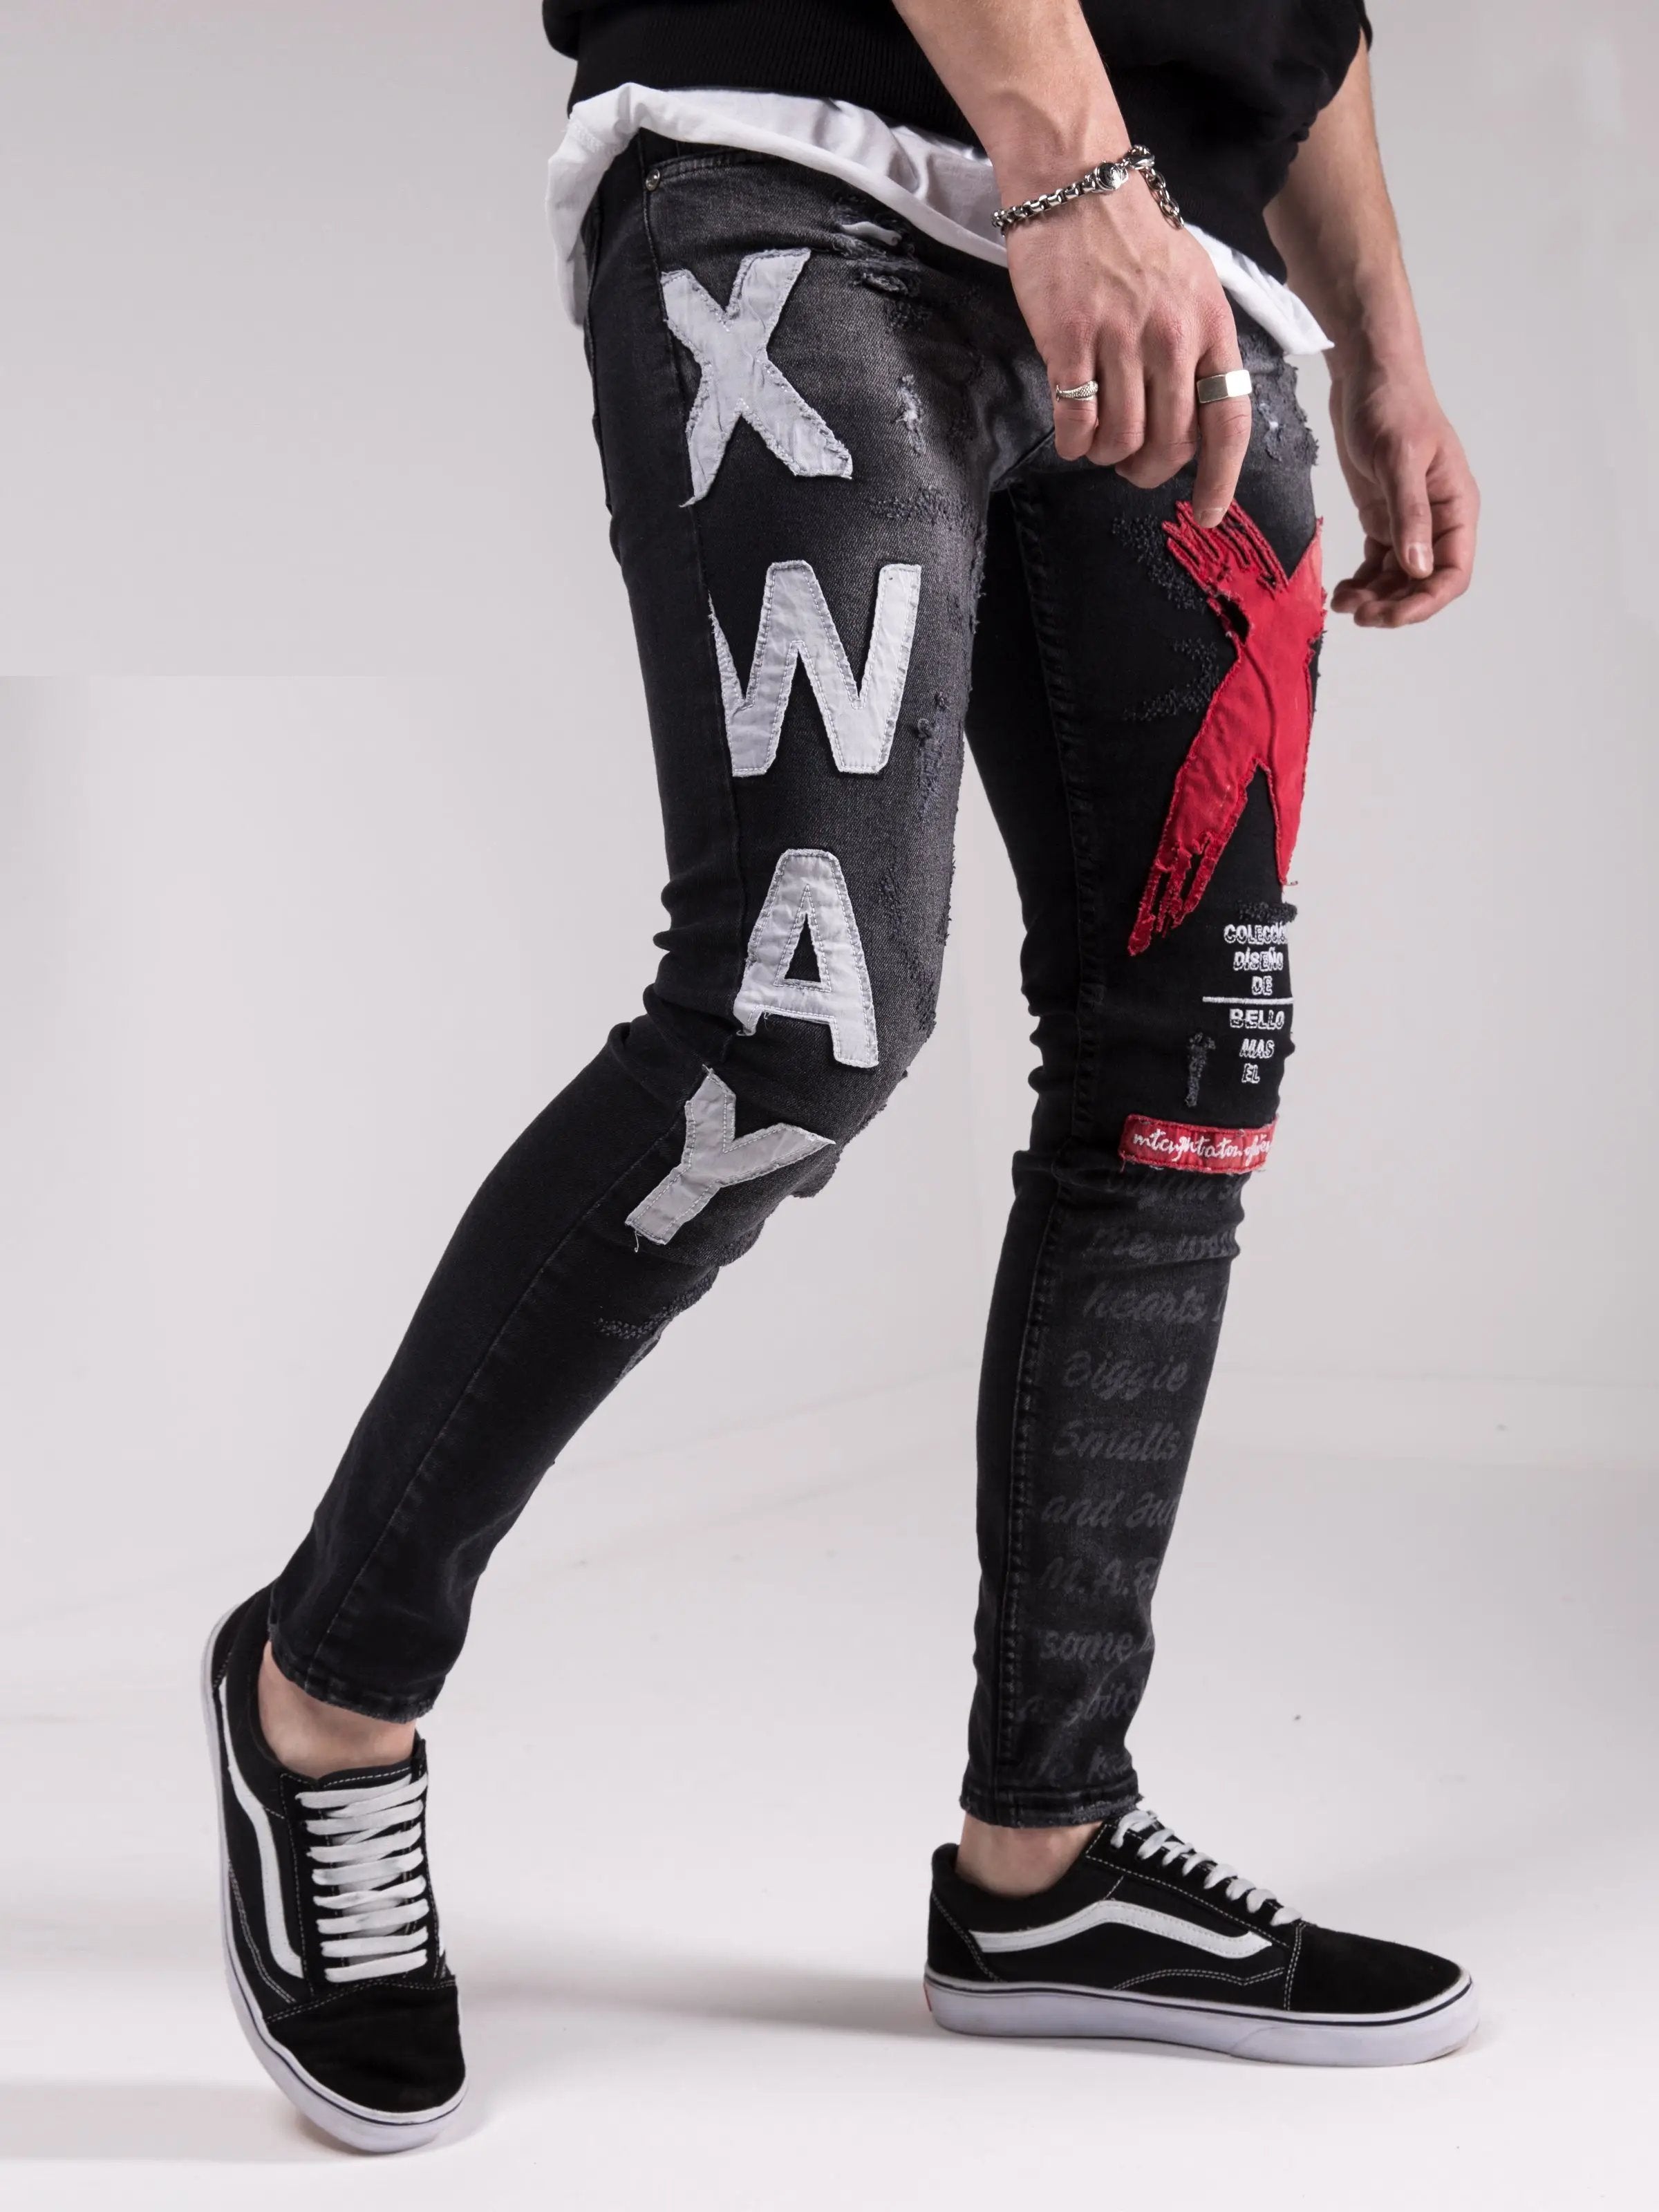 A man wearing a pair of MAD DOG skinny fit jeans with the word xway on them.